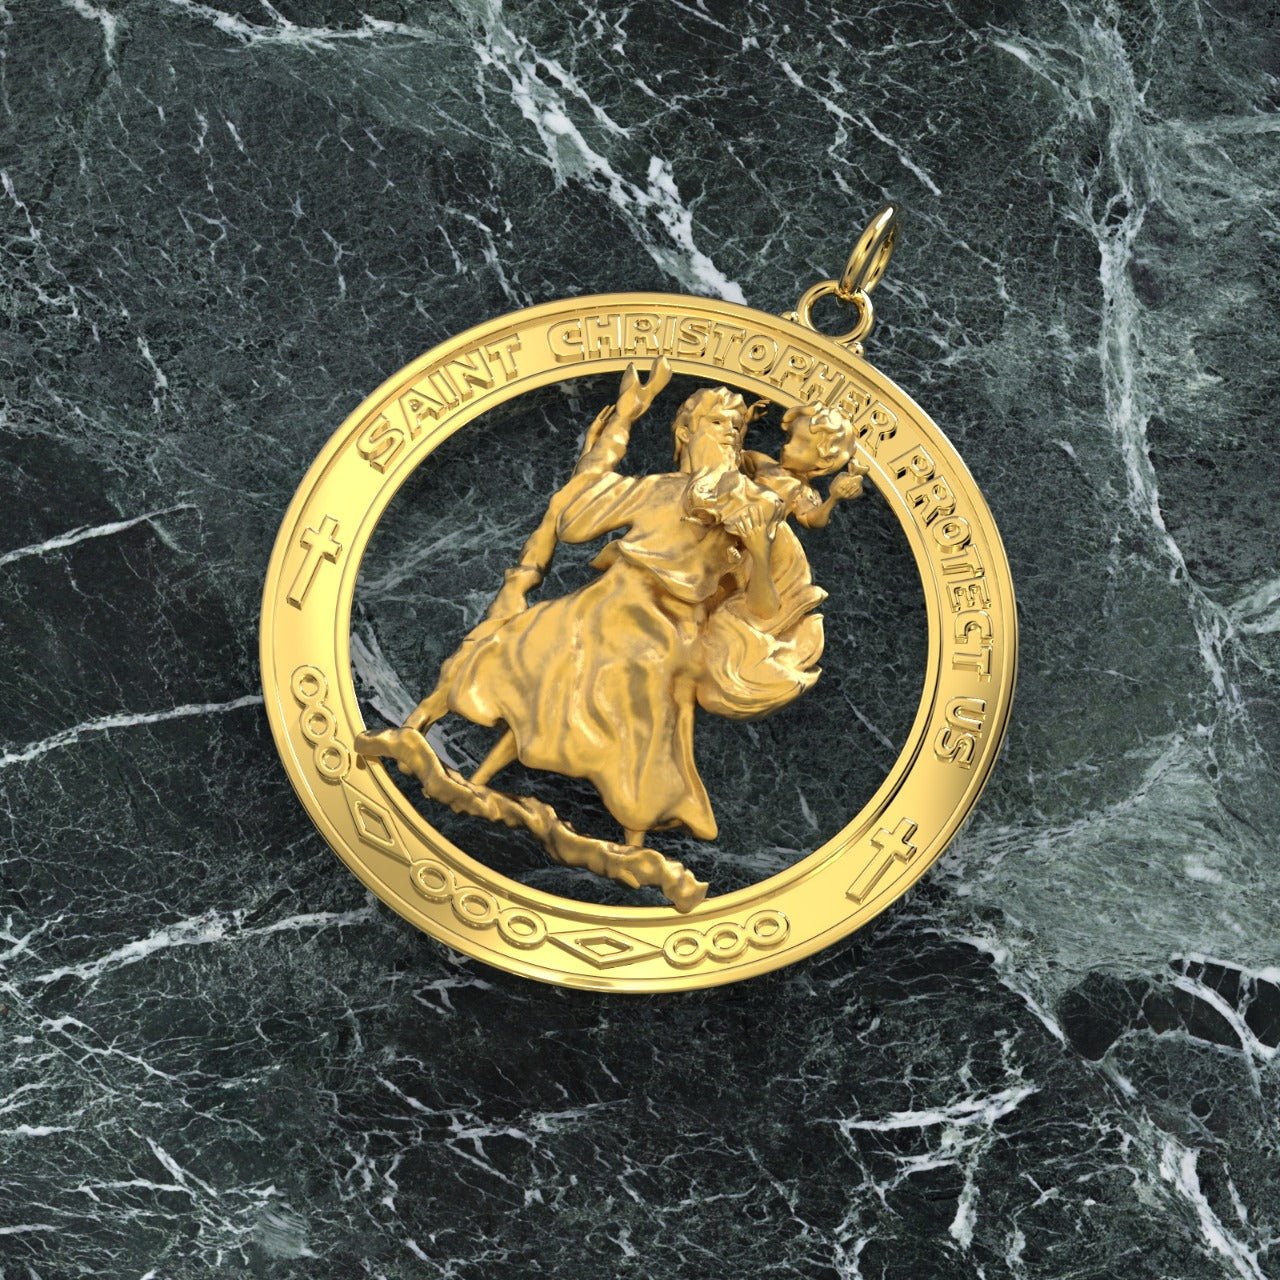 St Christopher Necklace - Men's Gold Round Pendant In Brand New